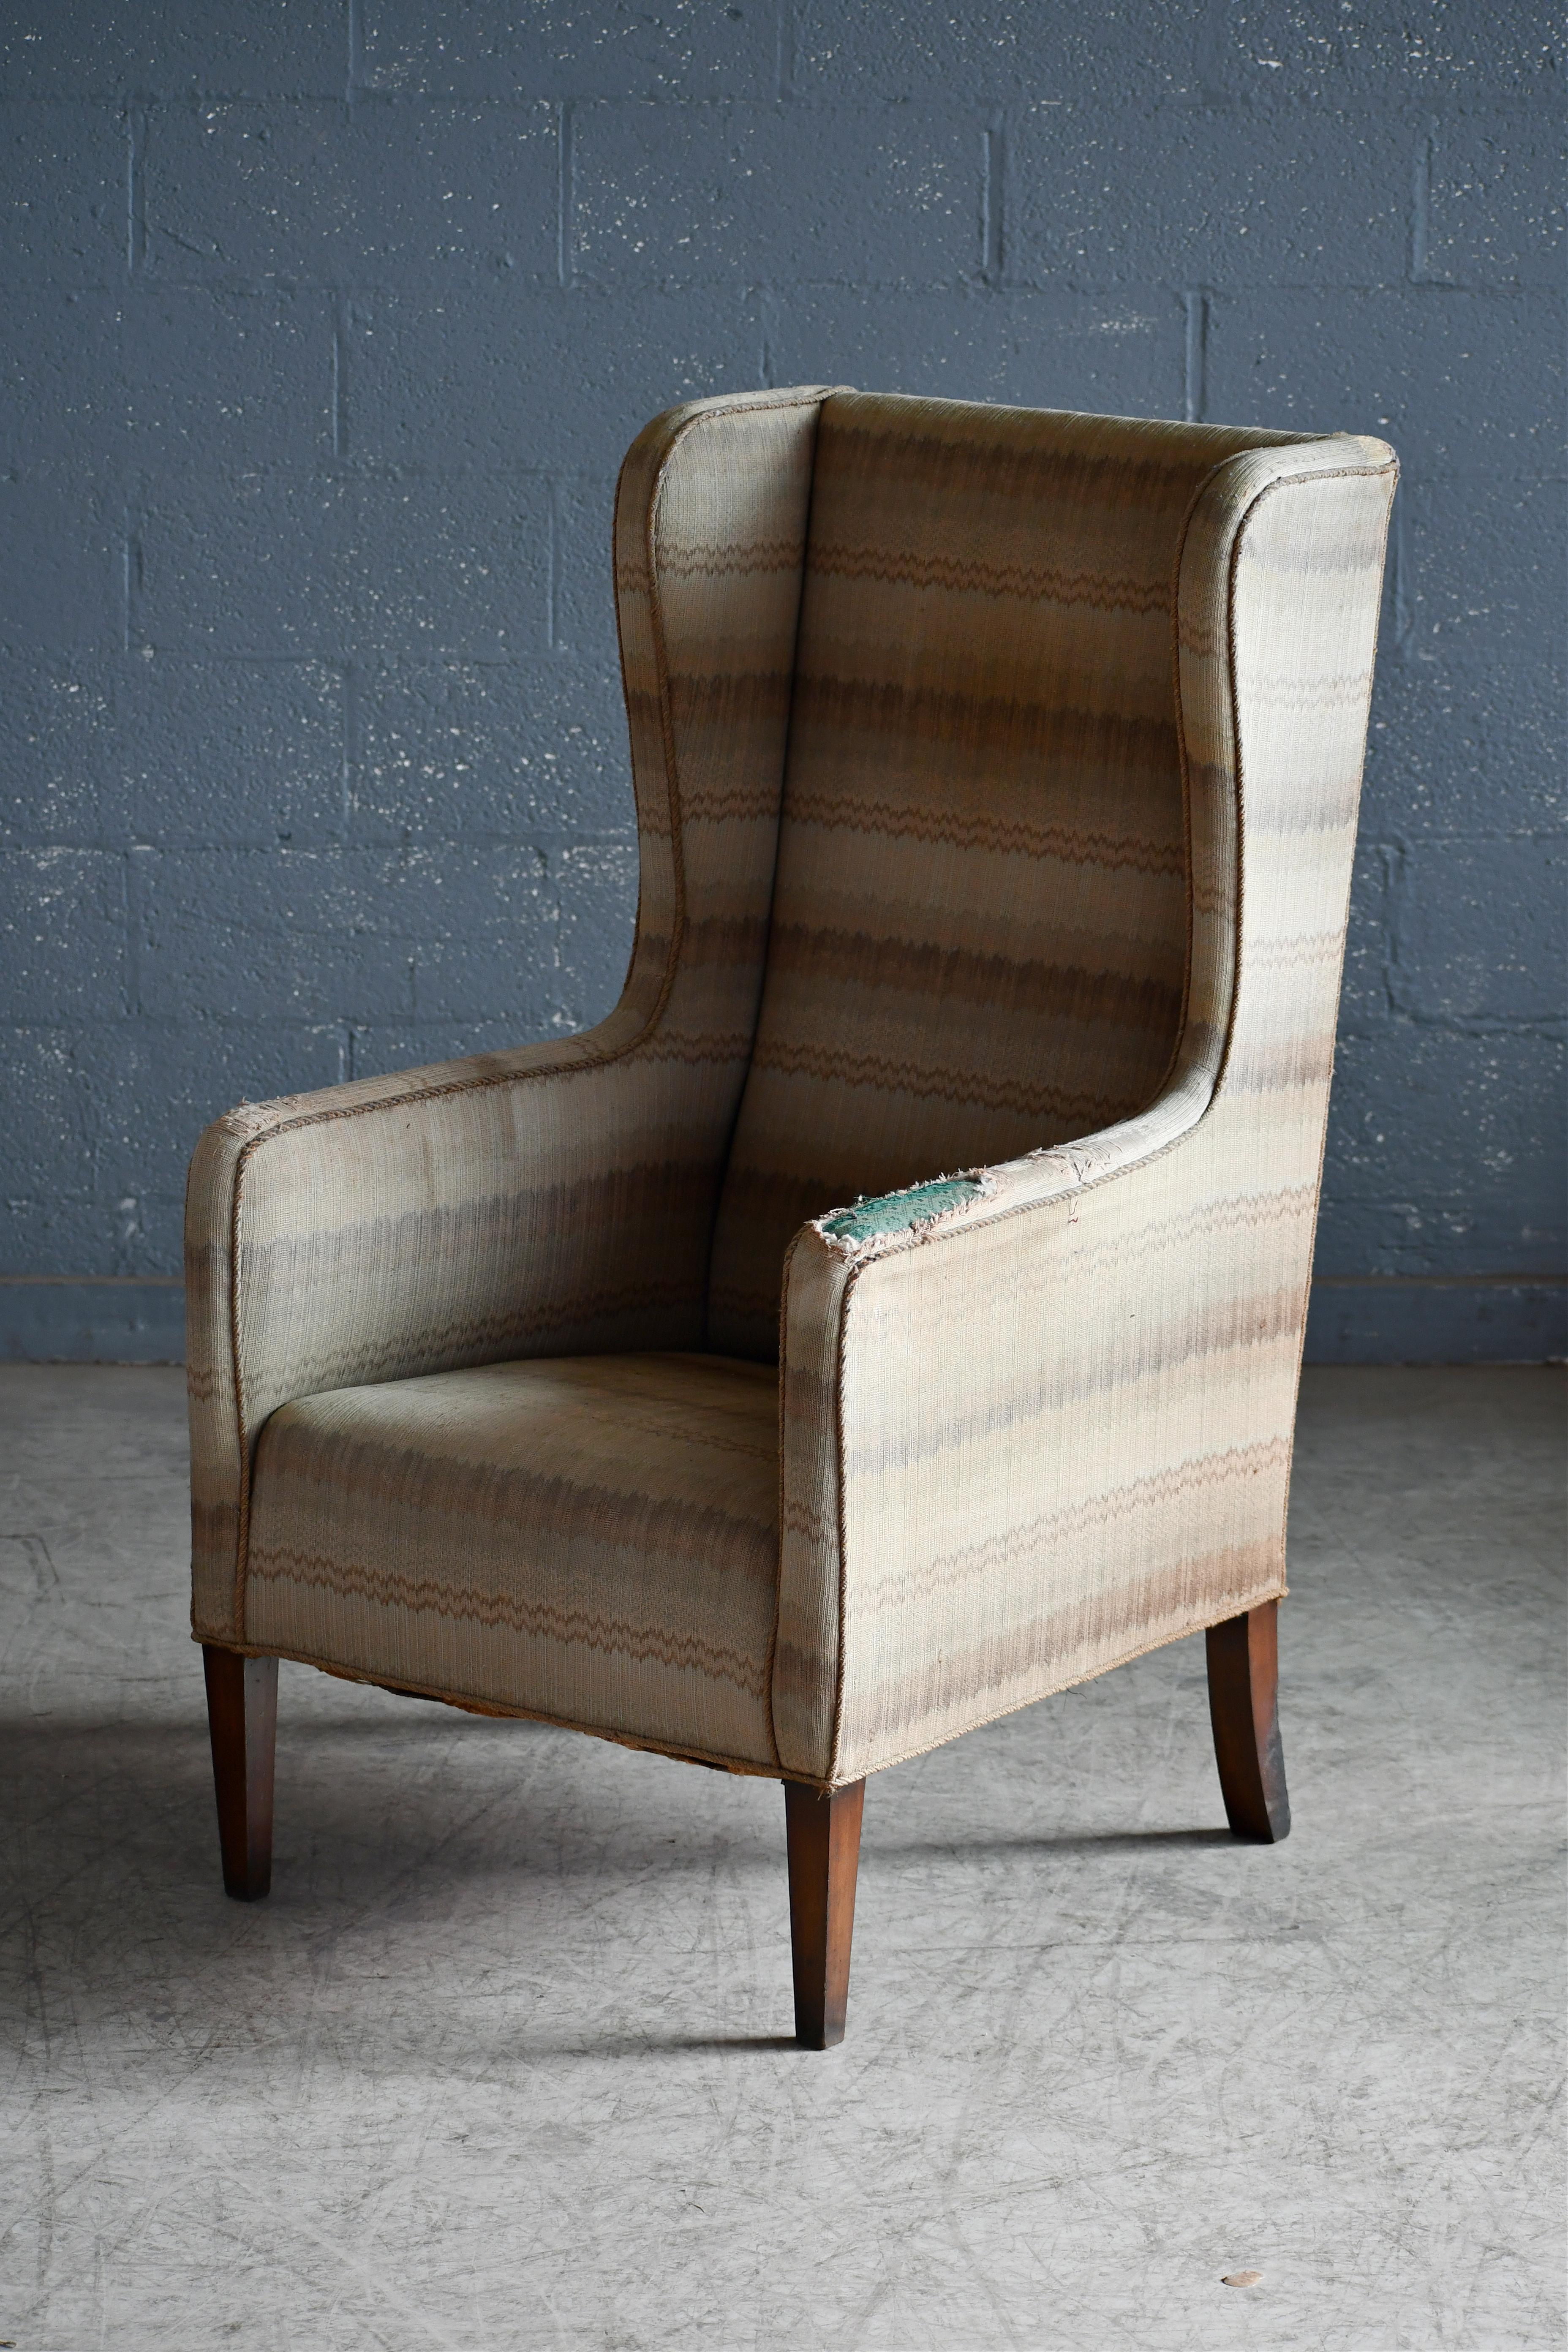 Mid-20th Century Tall Slim Frits Henningsen Style Highback Lounge Chair, Denmark 1950's For Sale